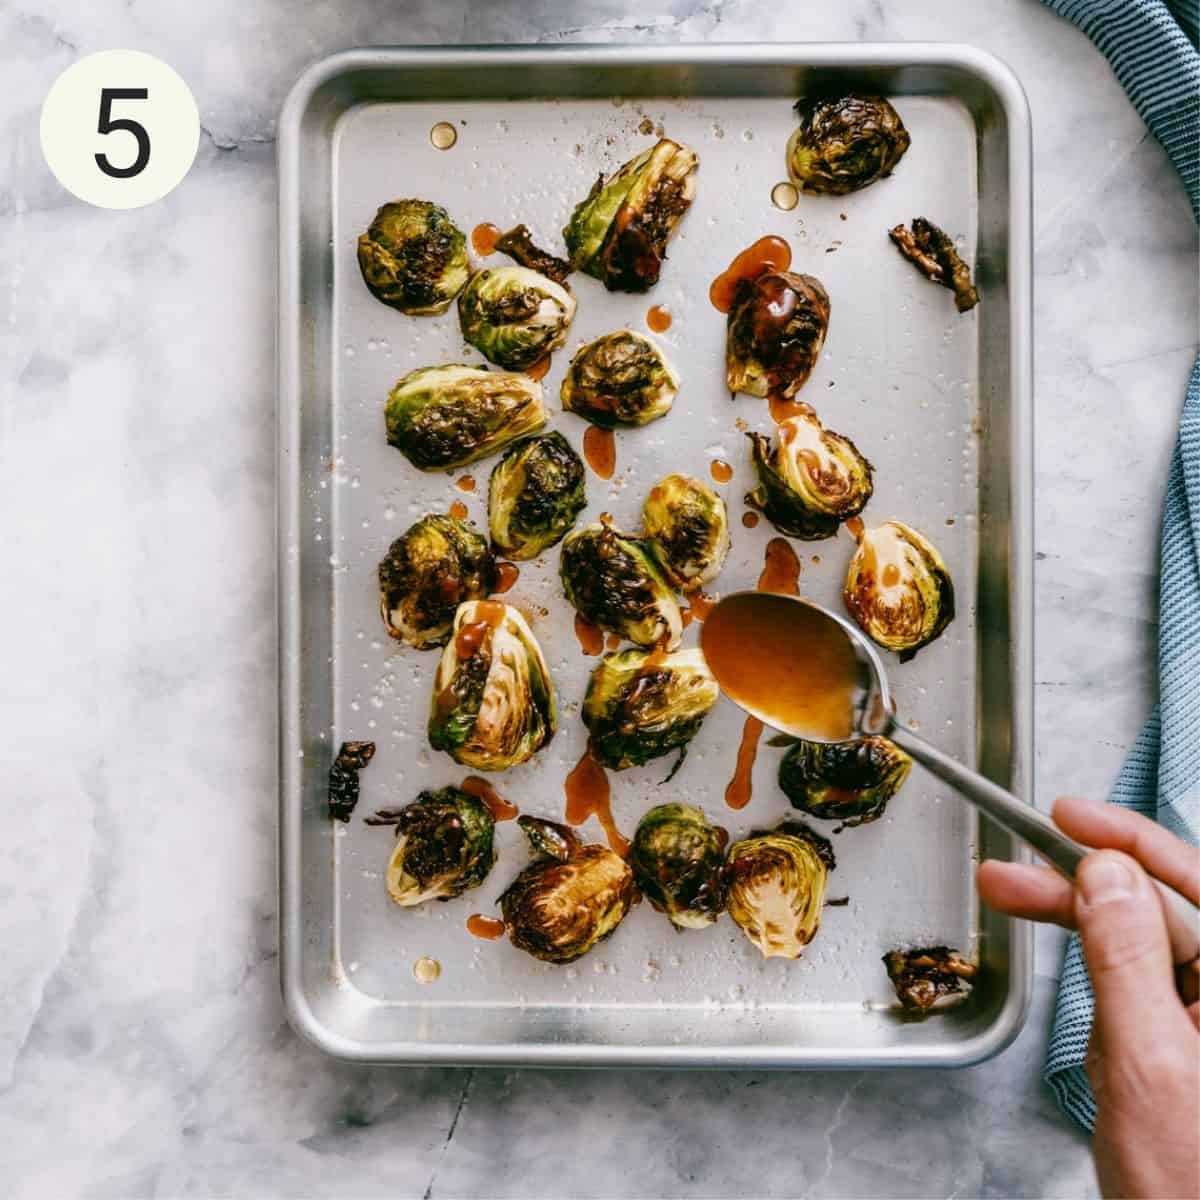 drizzling honey sriracha sauce on roasted brussel sprouts.